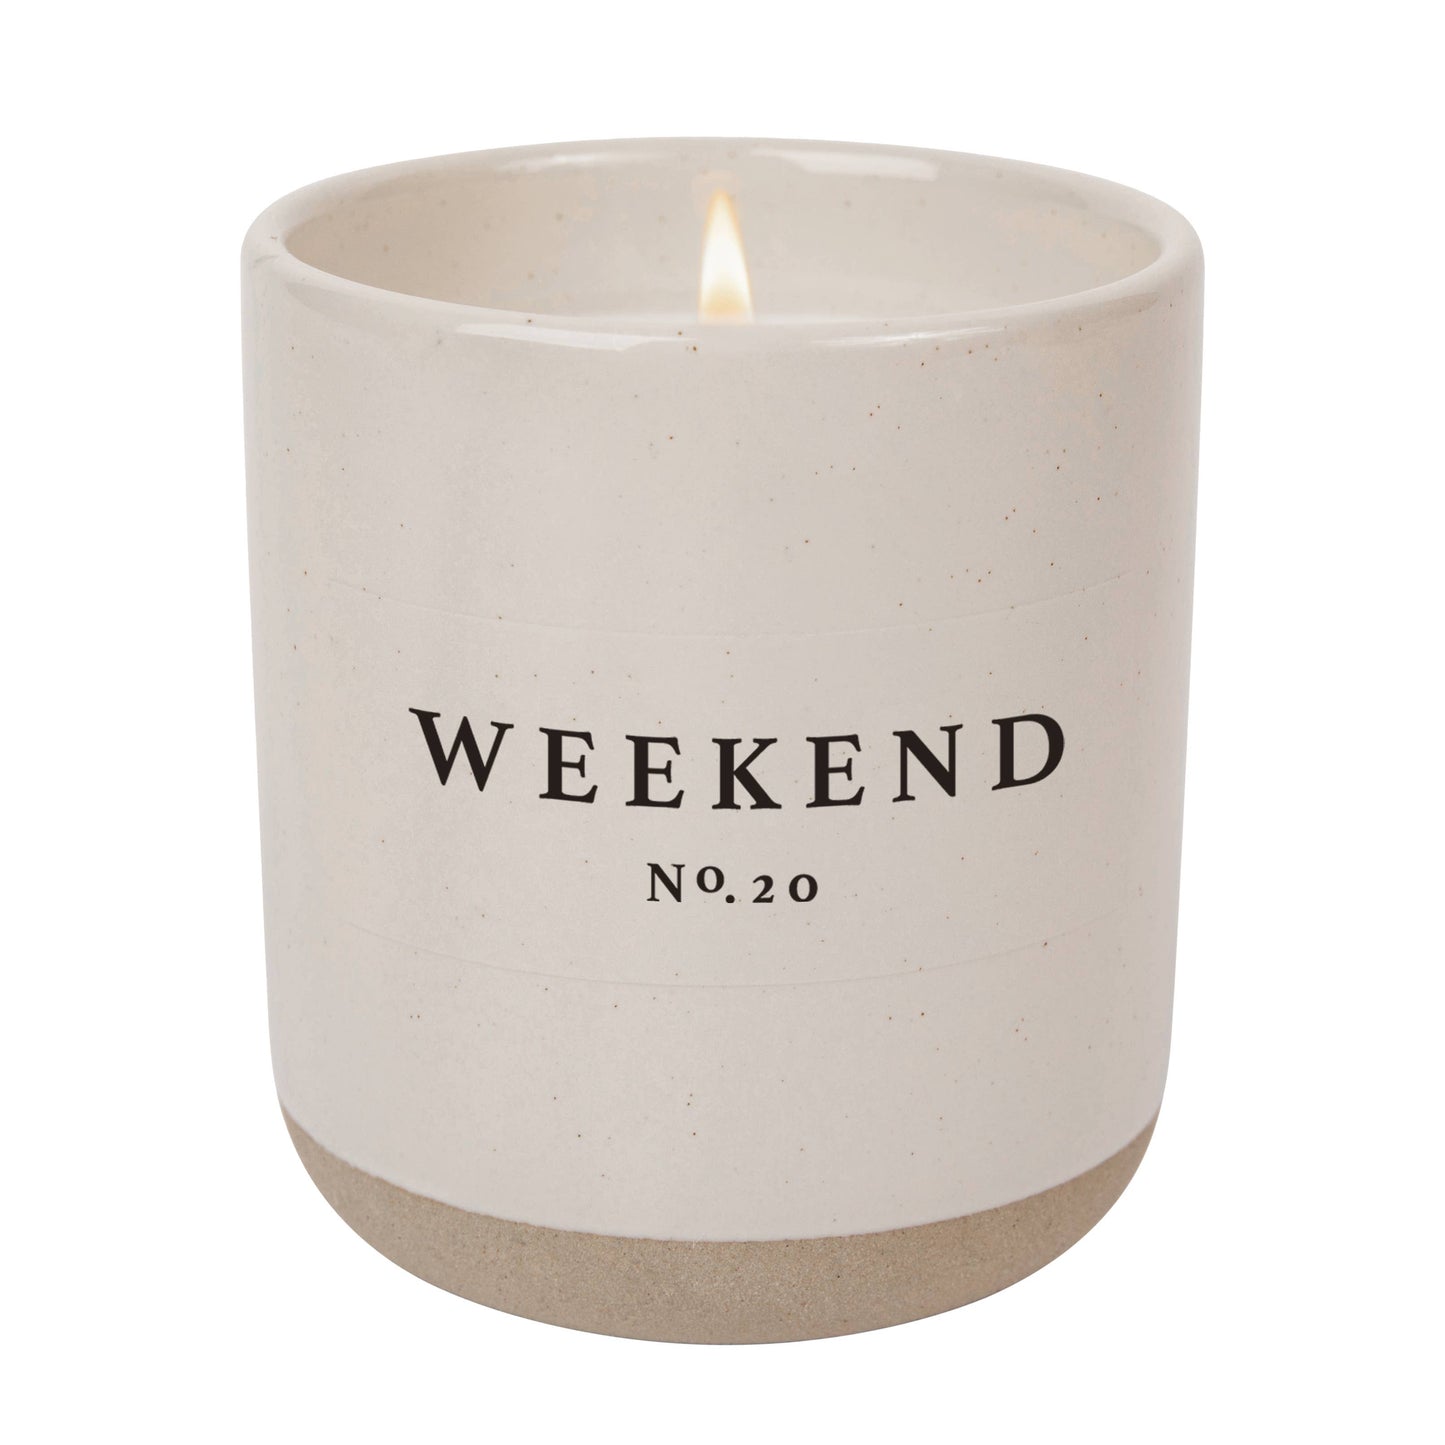 The WEEKEND 12oz Soy Candle